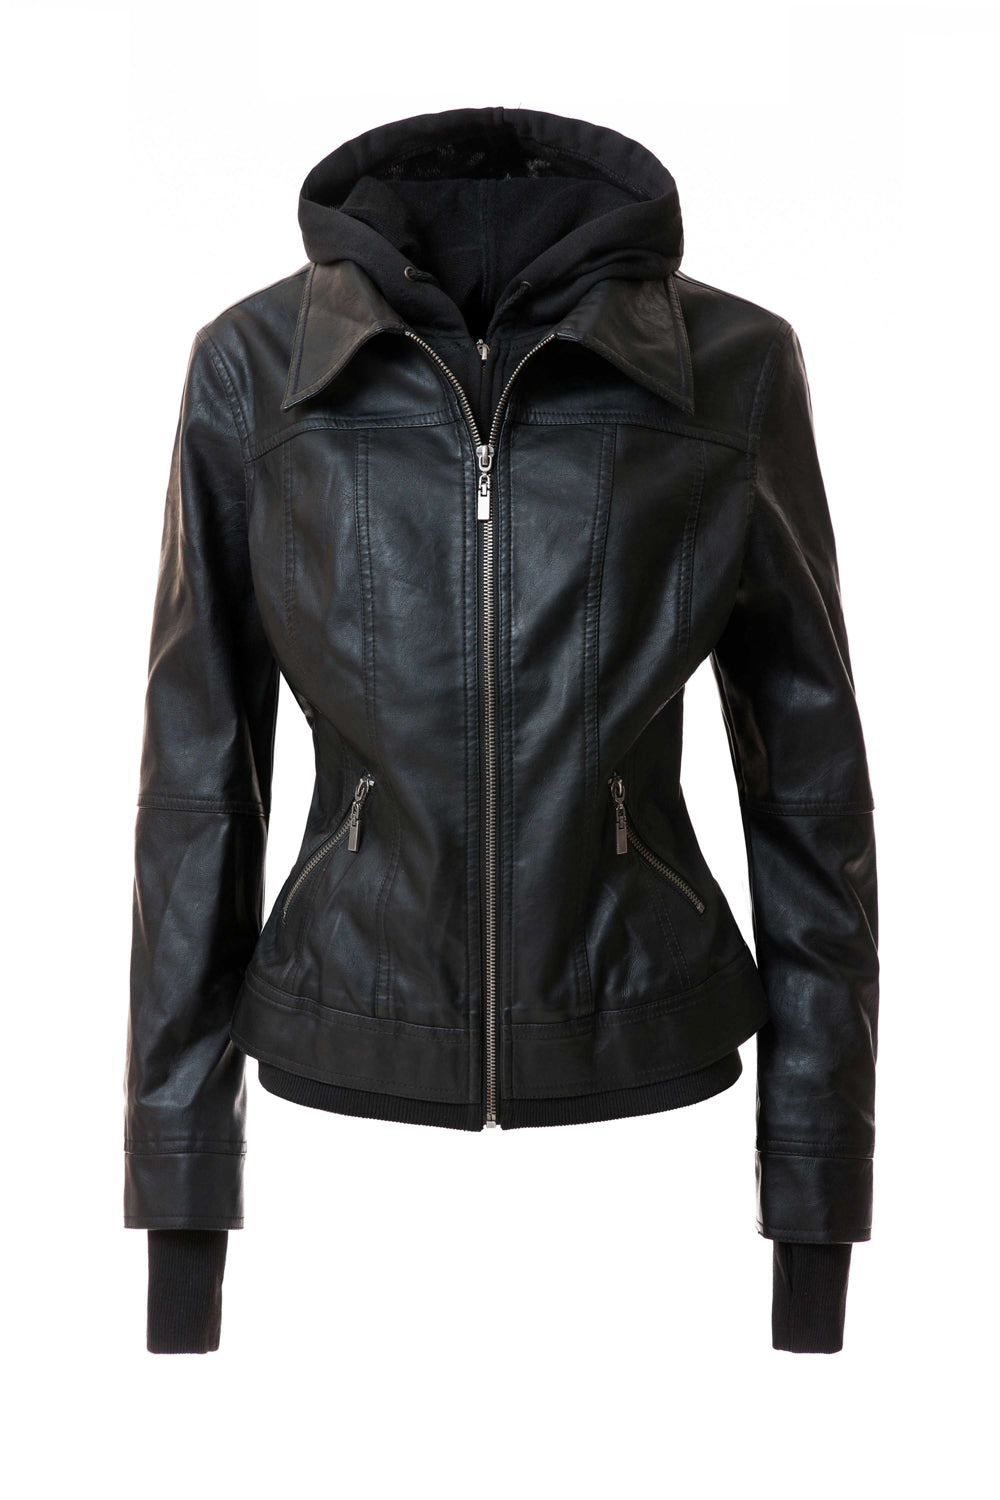 Women's Casual Stand Collar Detachable Hood PU Leather Jacket